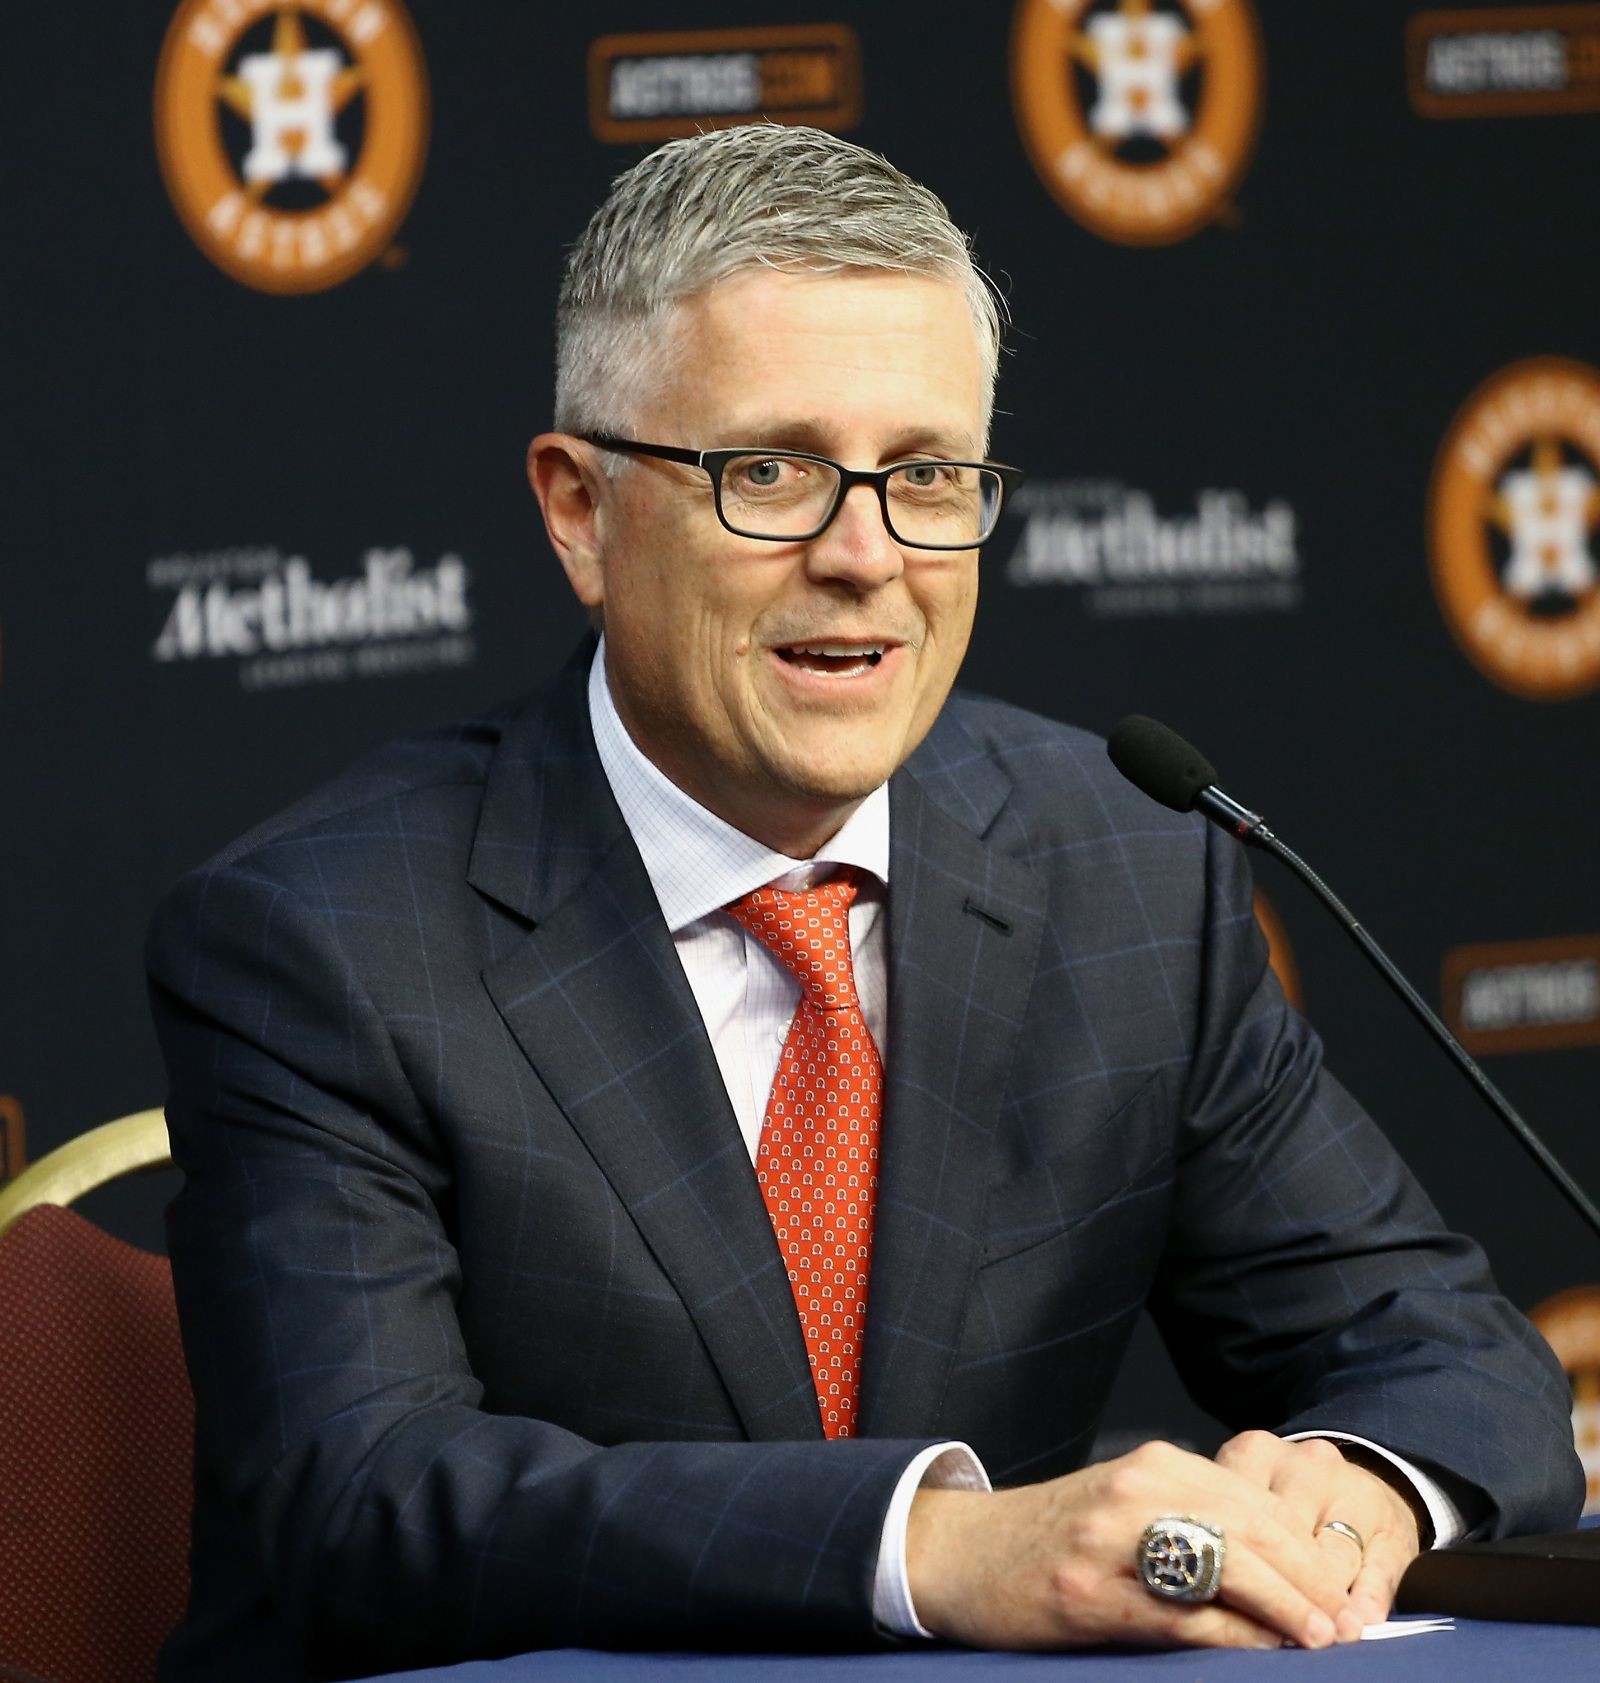 Three Trade Targets the Astros Should Look Into Acquiring